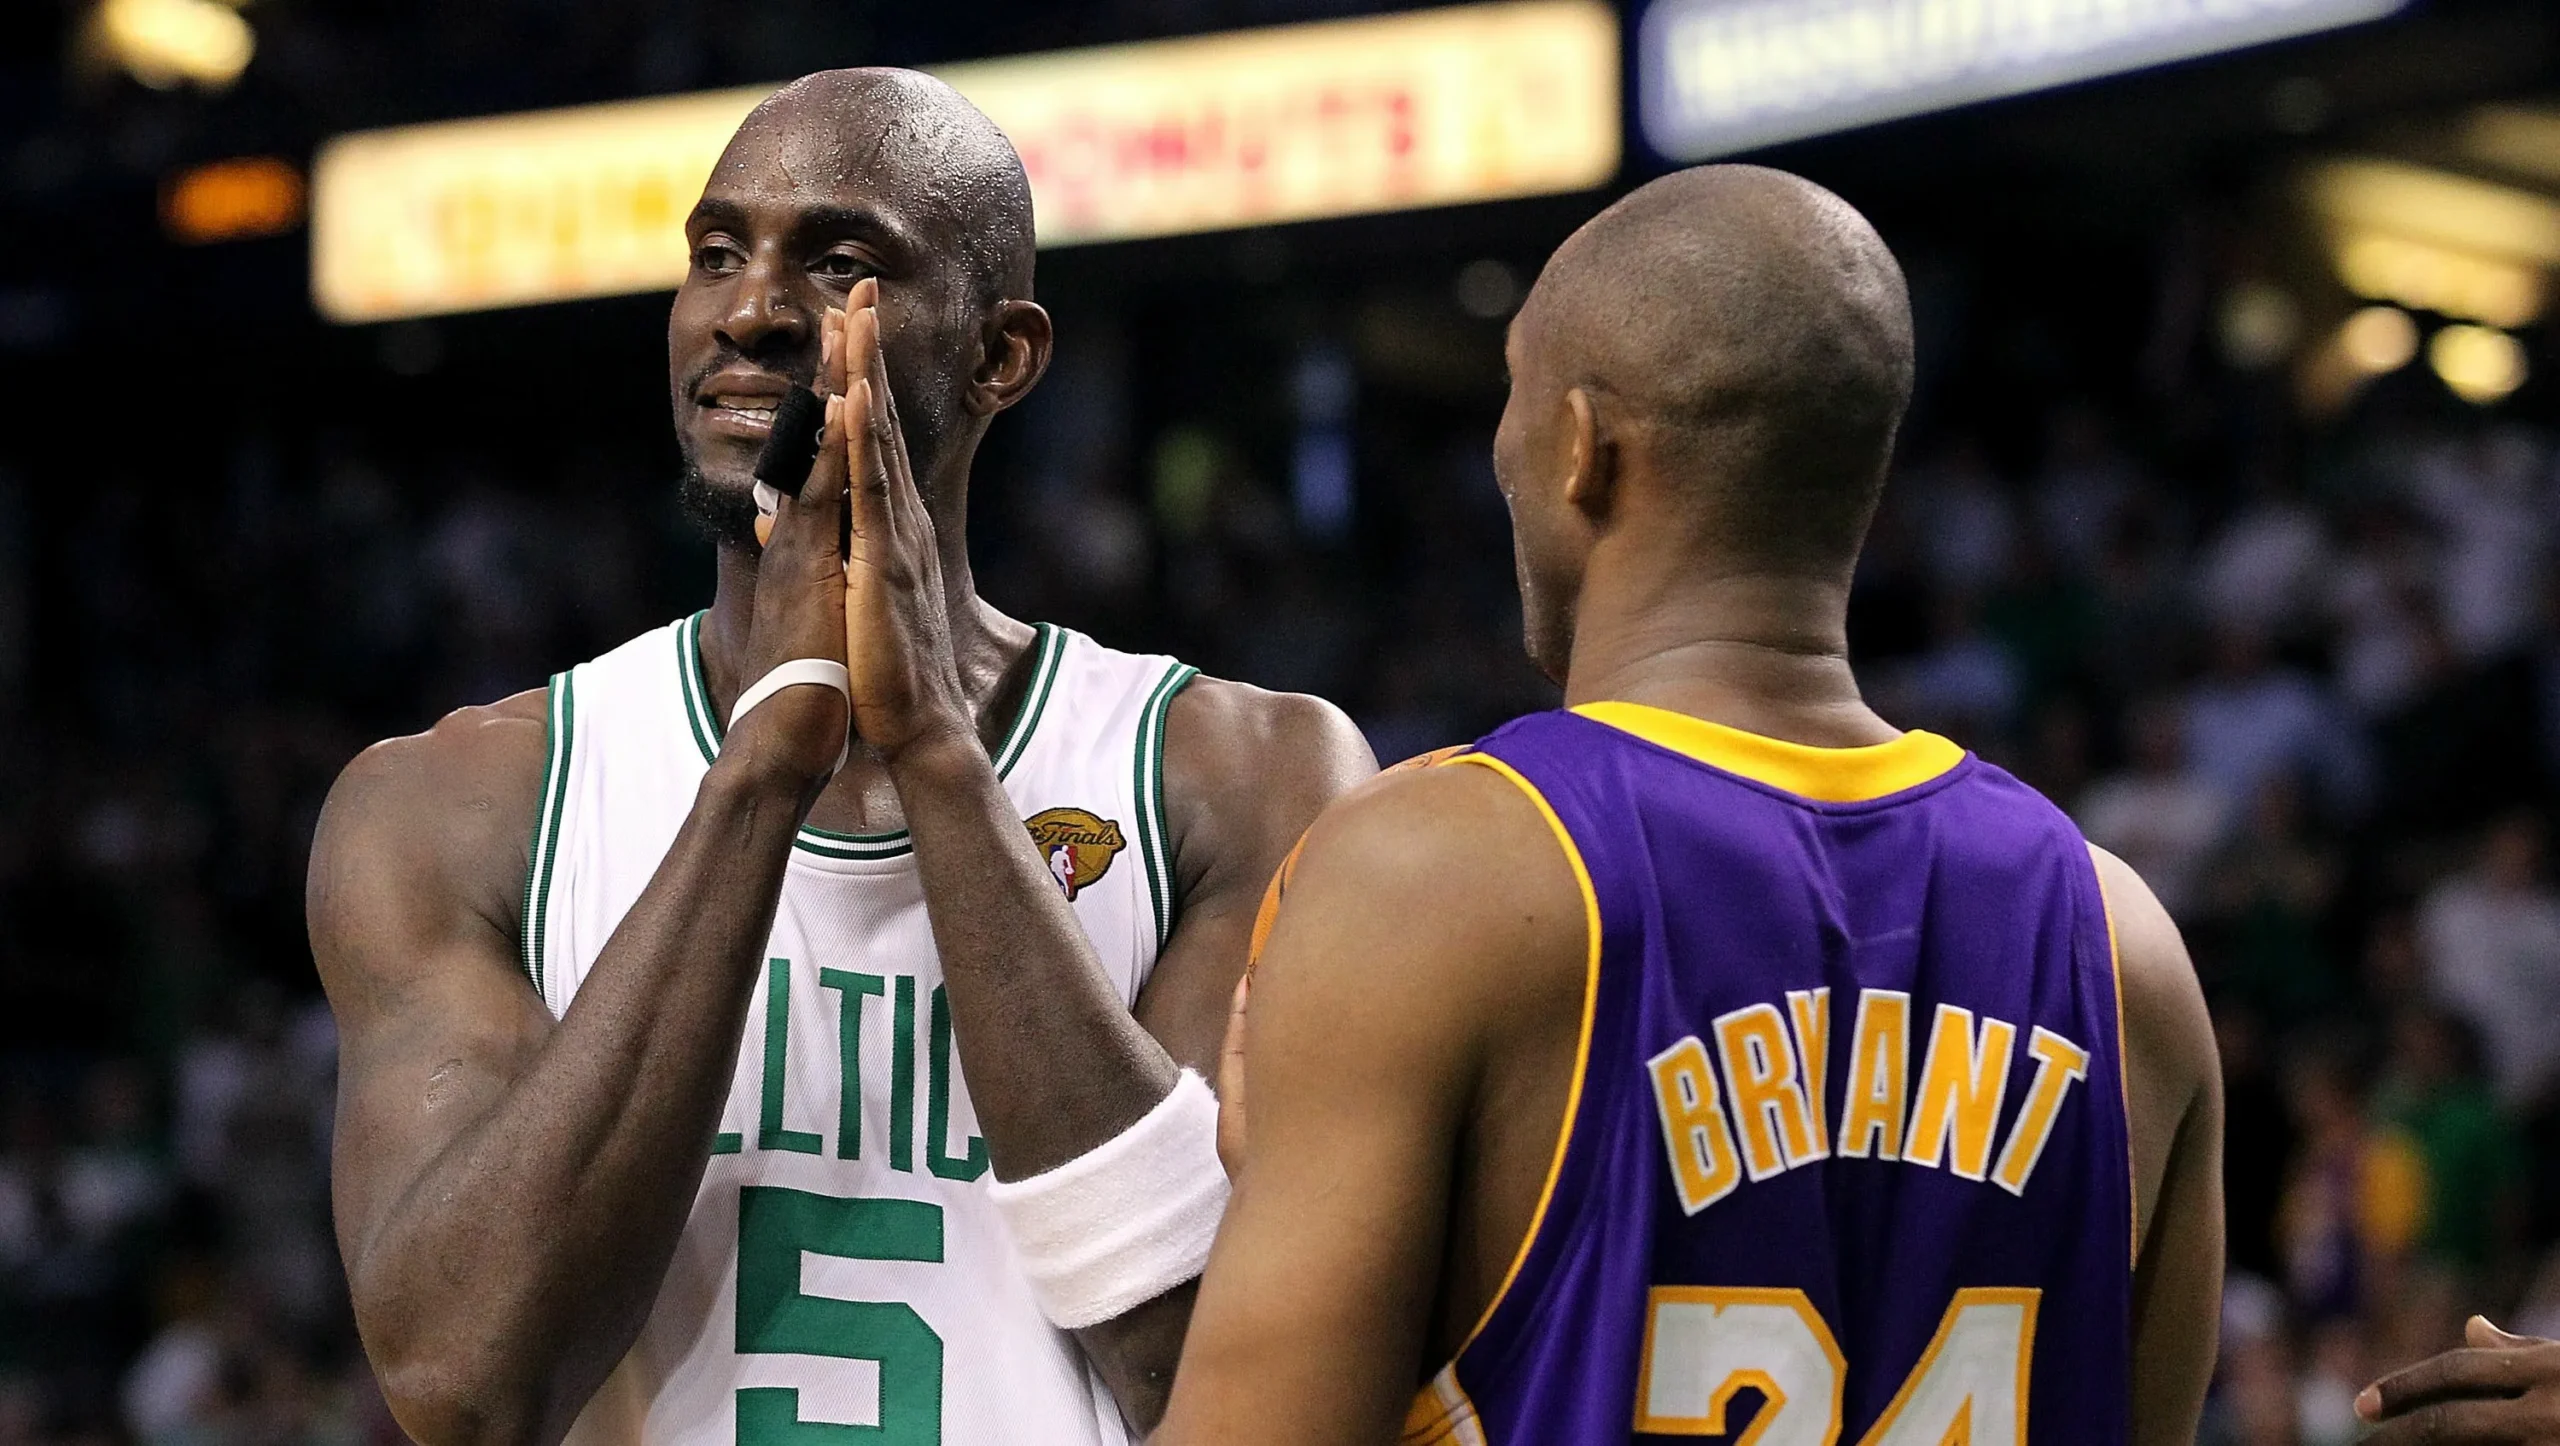 Kevin Garnett Gets Excited About Bronny James’ Draft Combine and Brings up Kobe Bryant’s 1996 Draft